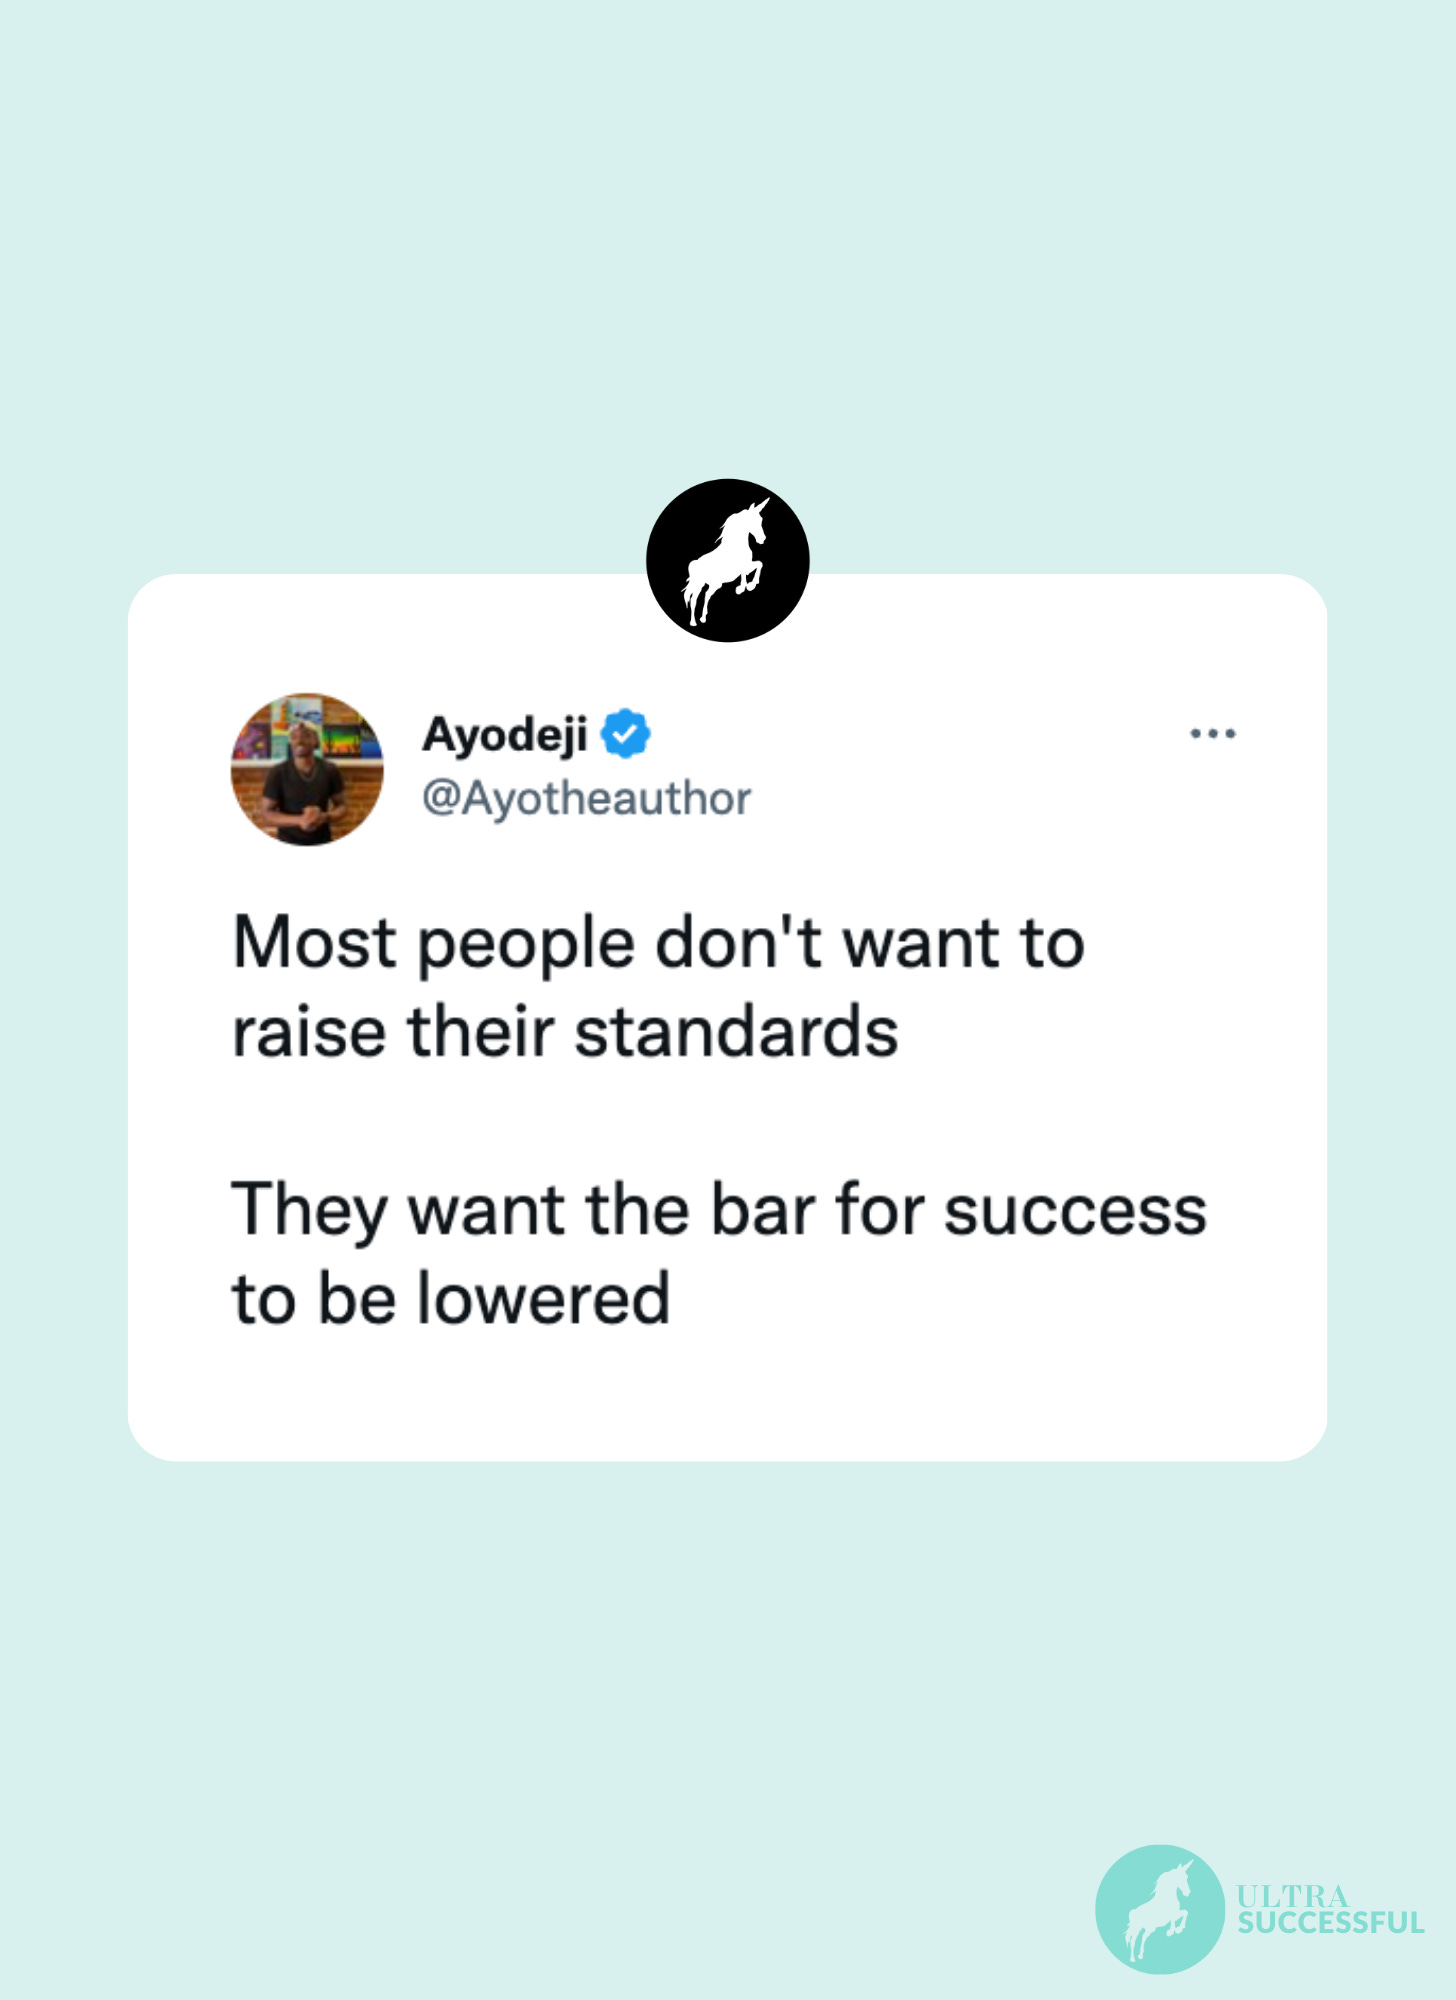 @Ayotheauthor: Most people don't want to raise their standards  They want the bar for success to be lowered